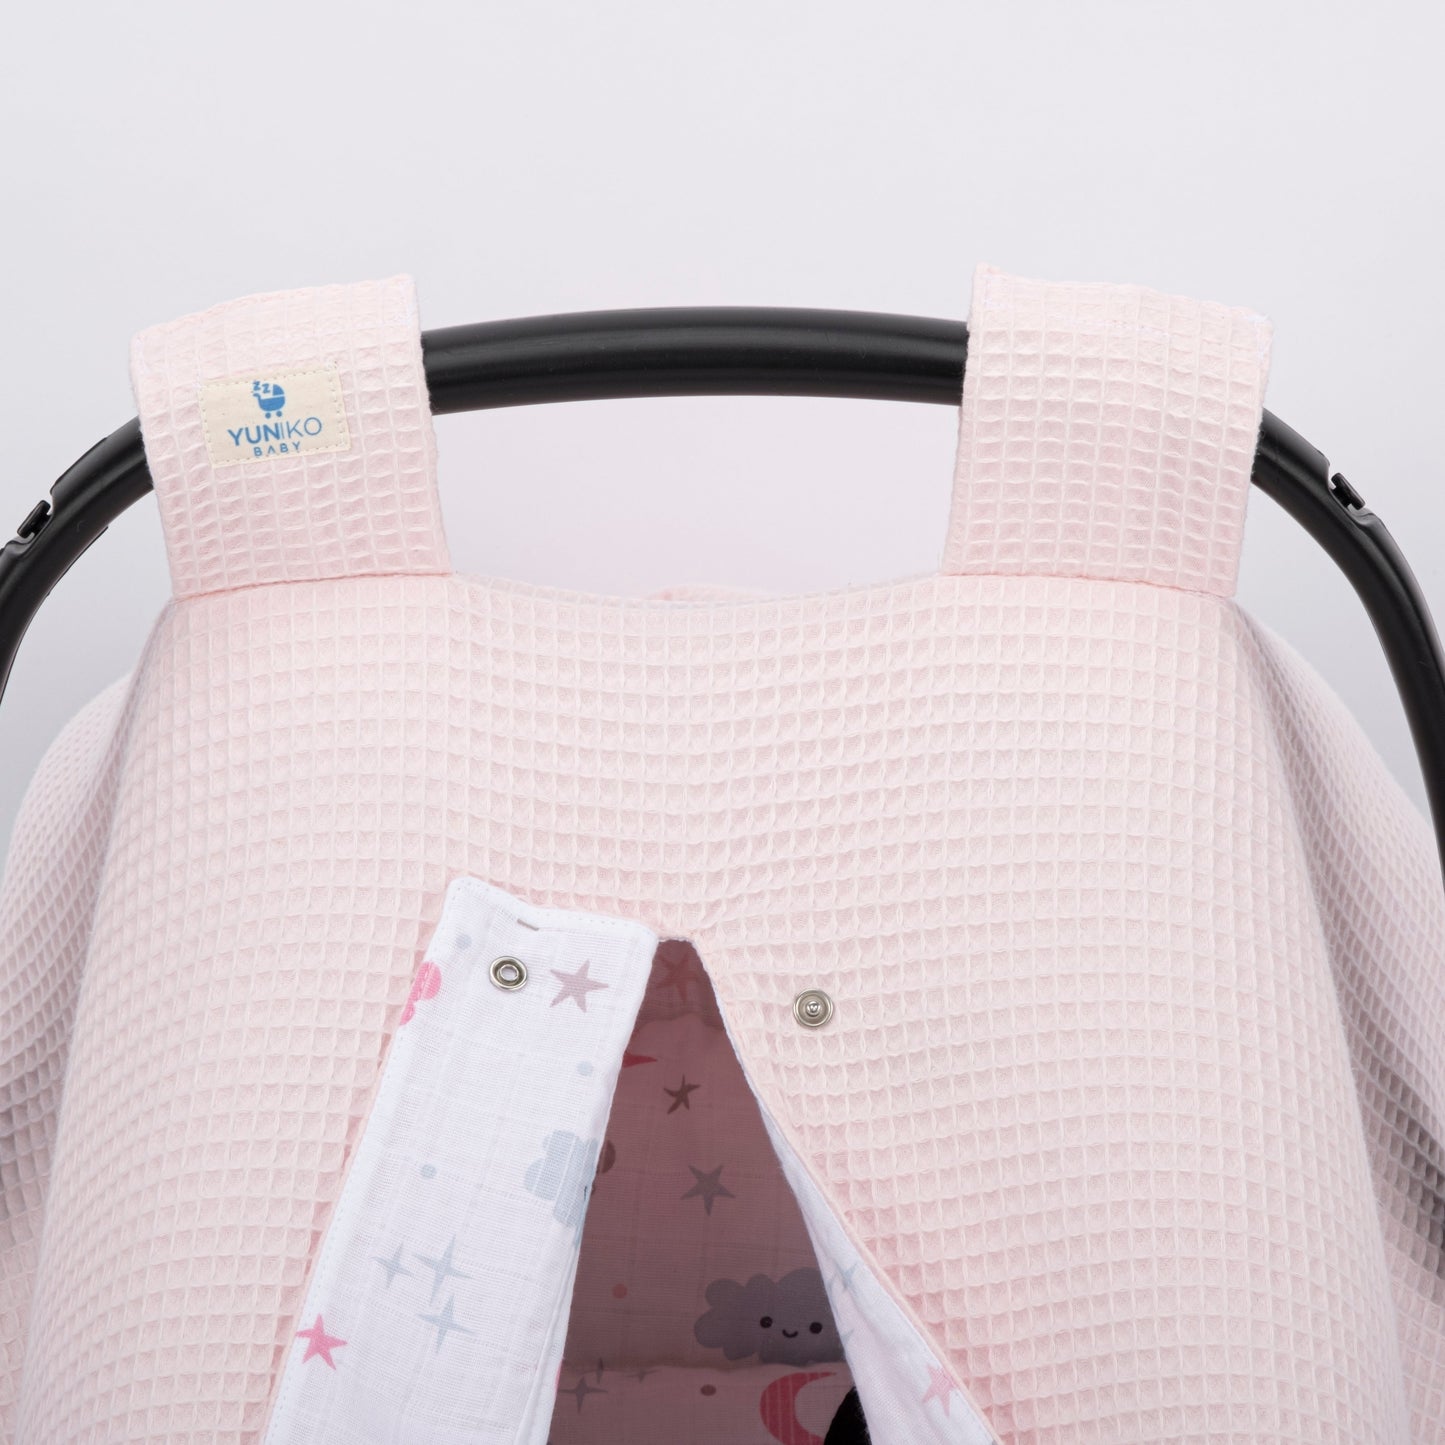 Stroller Cover Set - Double Side - Powder Honeycomb - Pink Cloud